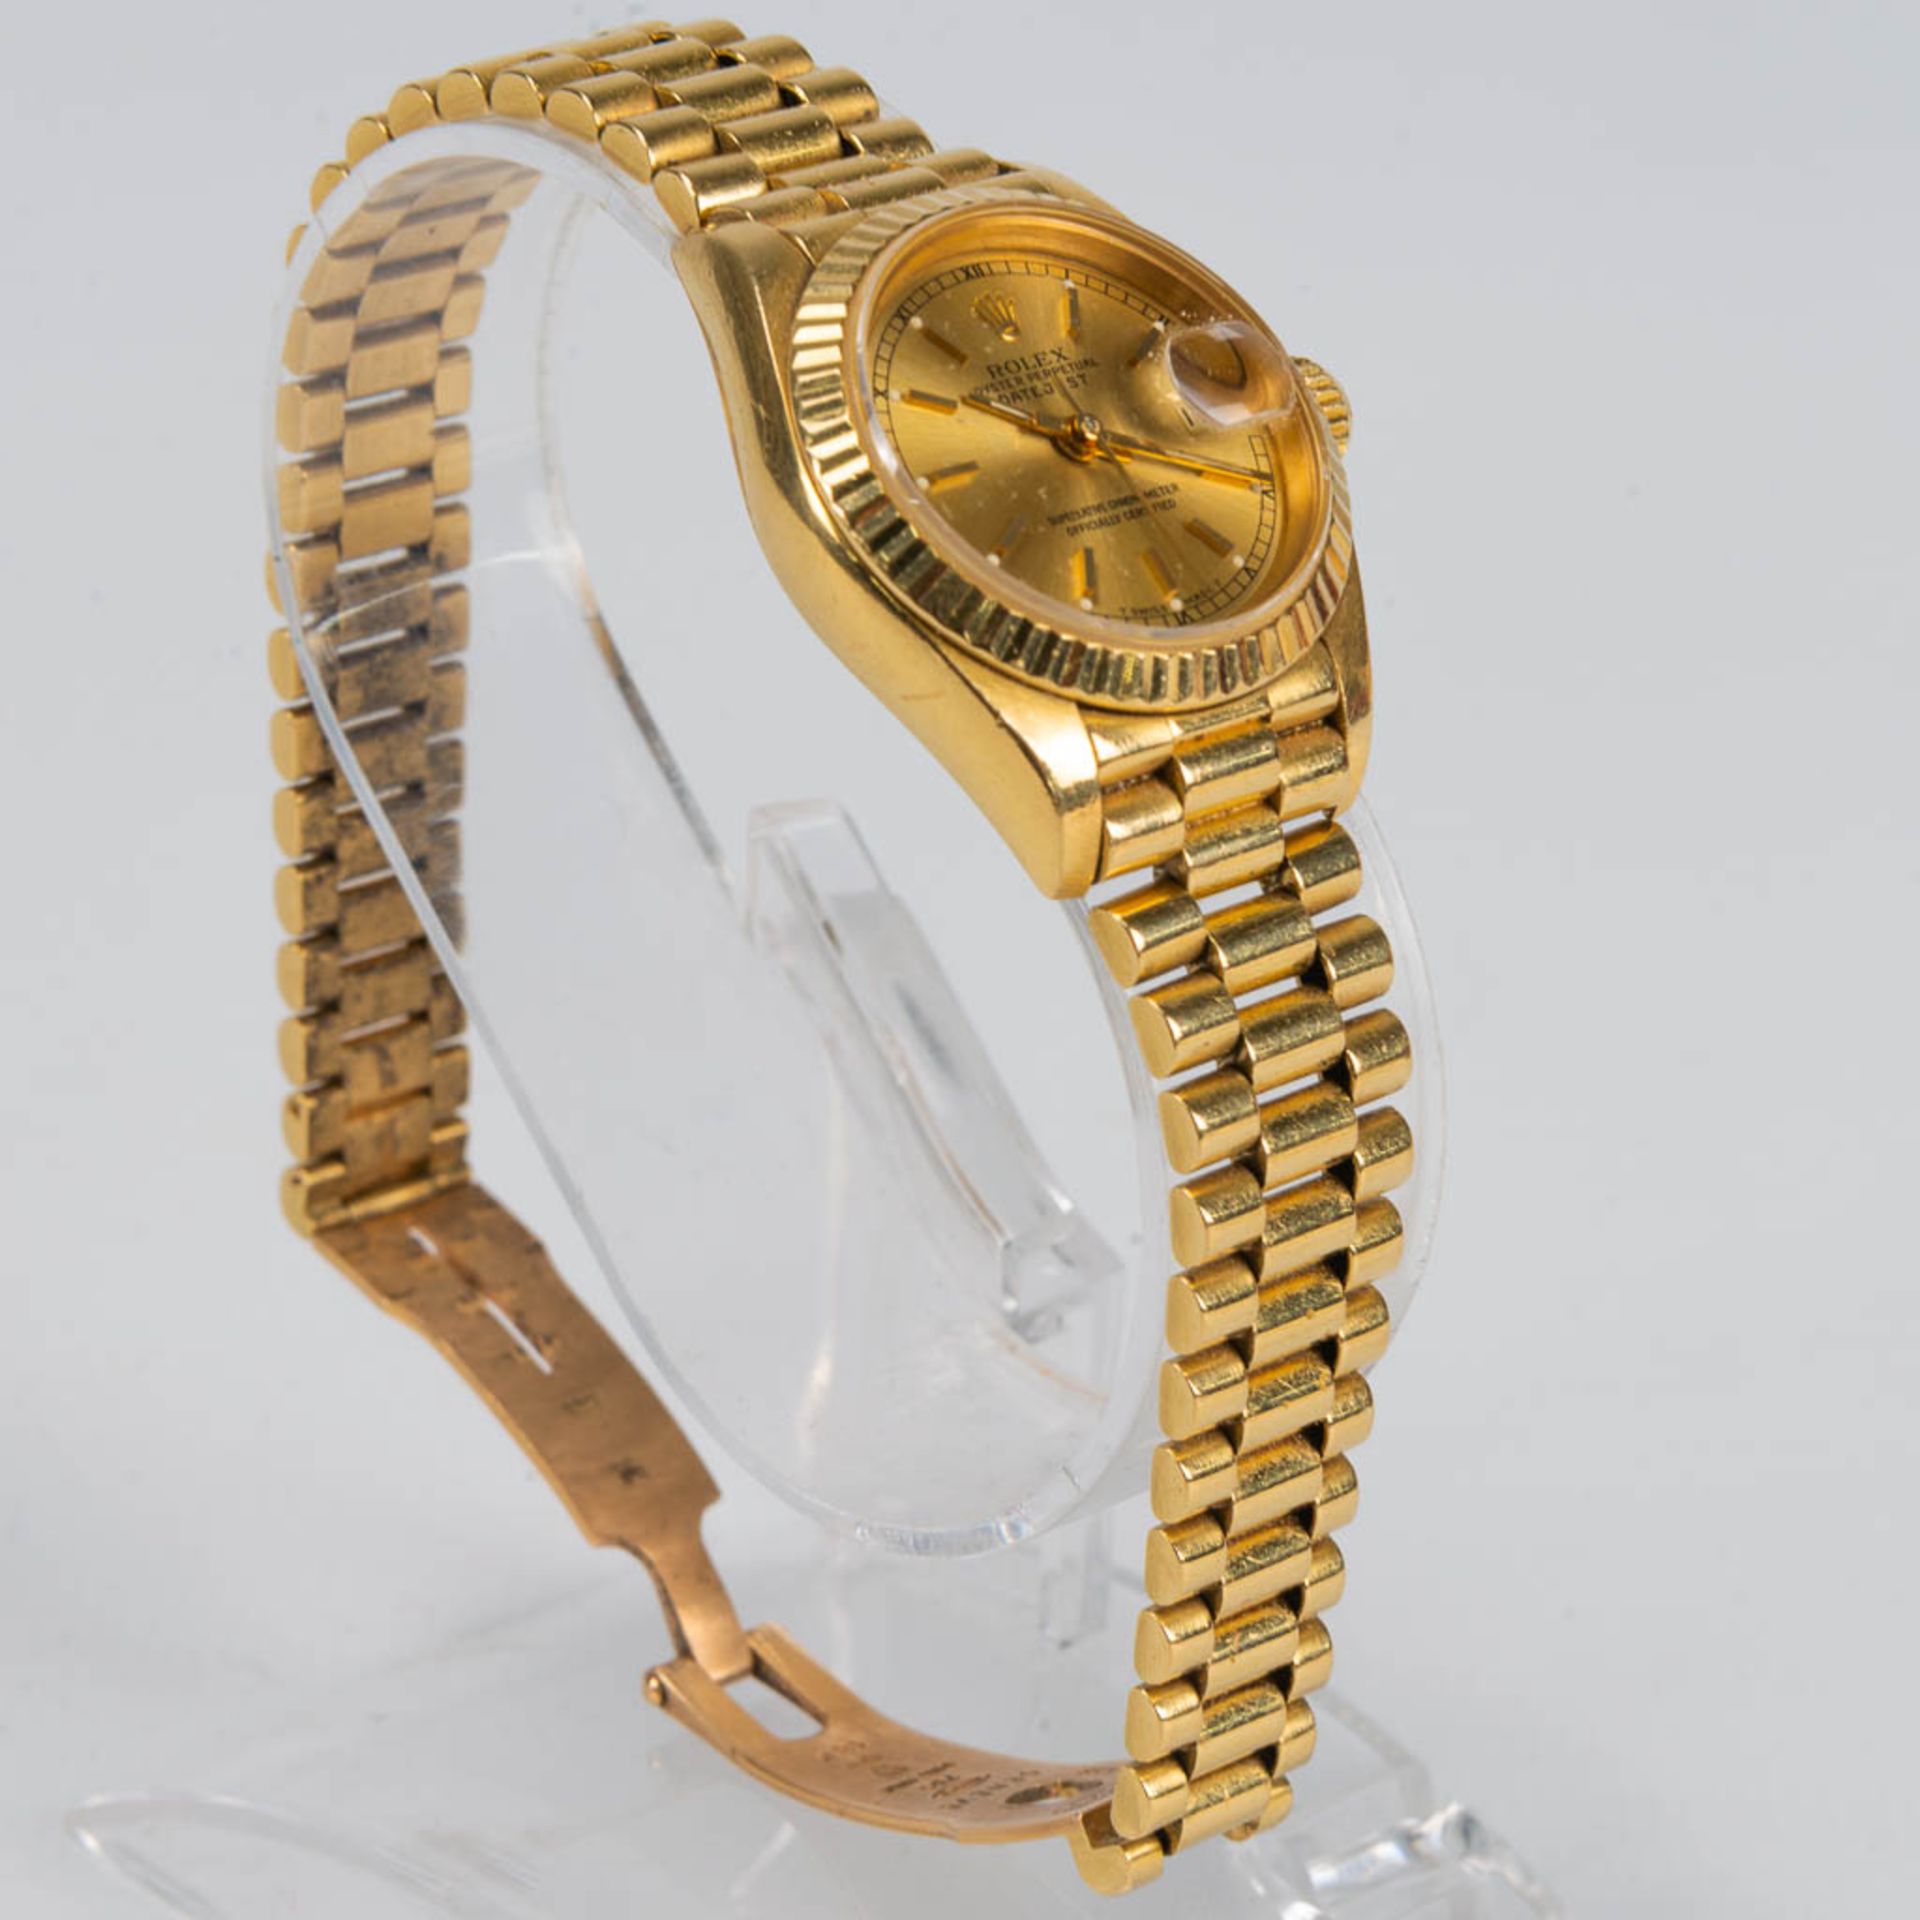 A Rolex Datejust ladies model 69178 made of 18kt gold with bracelet, original box and papers. 26mm. - Image 6 of 11